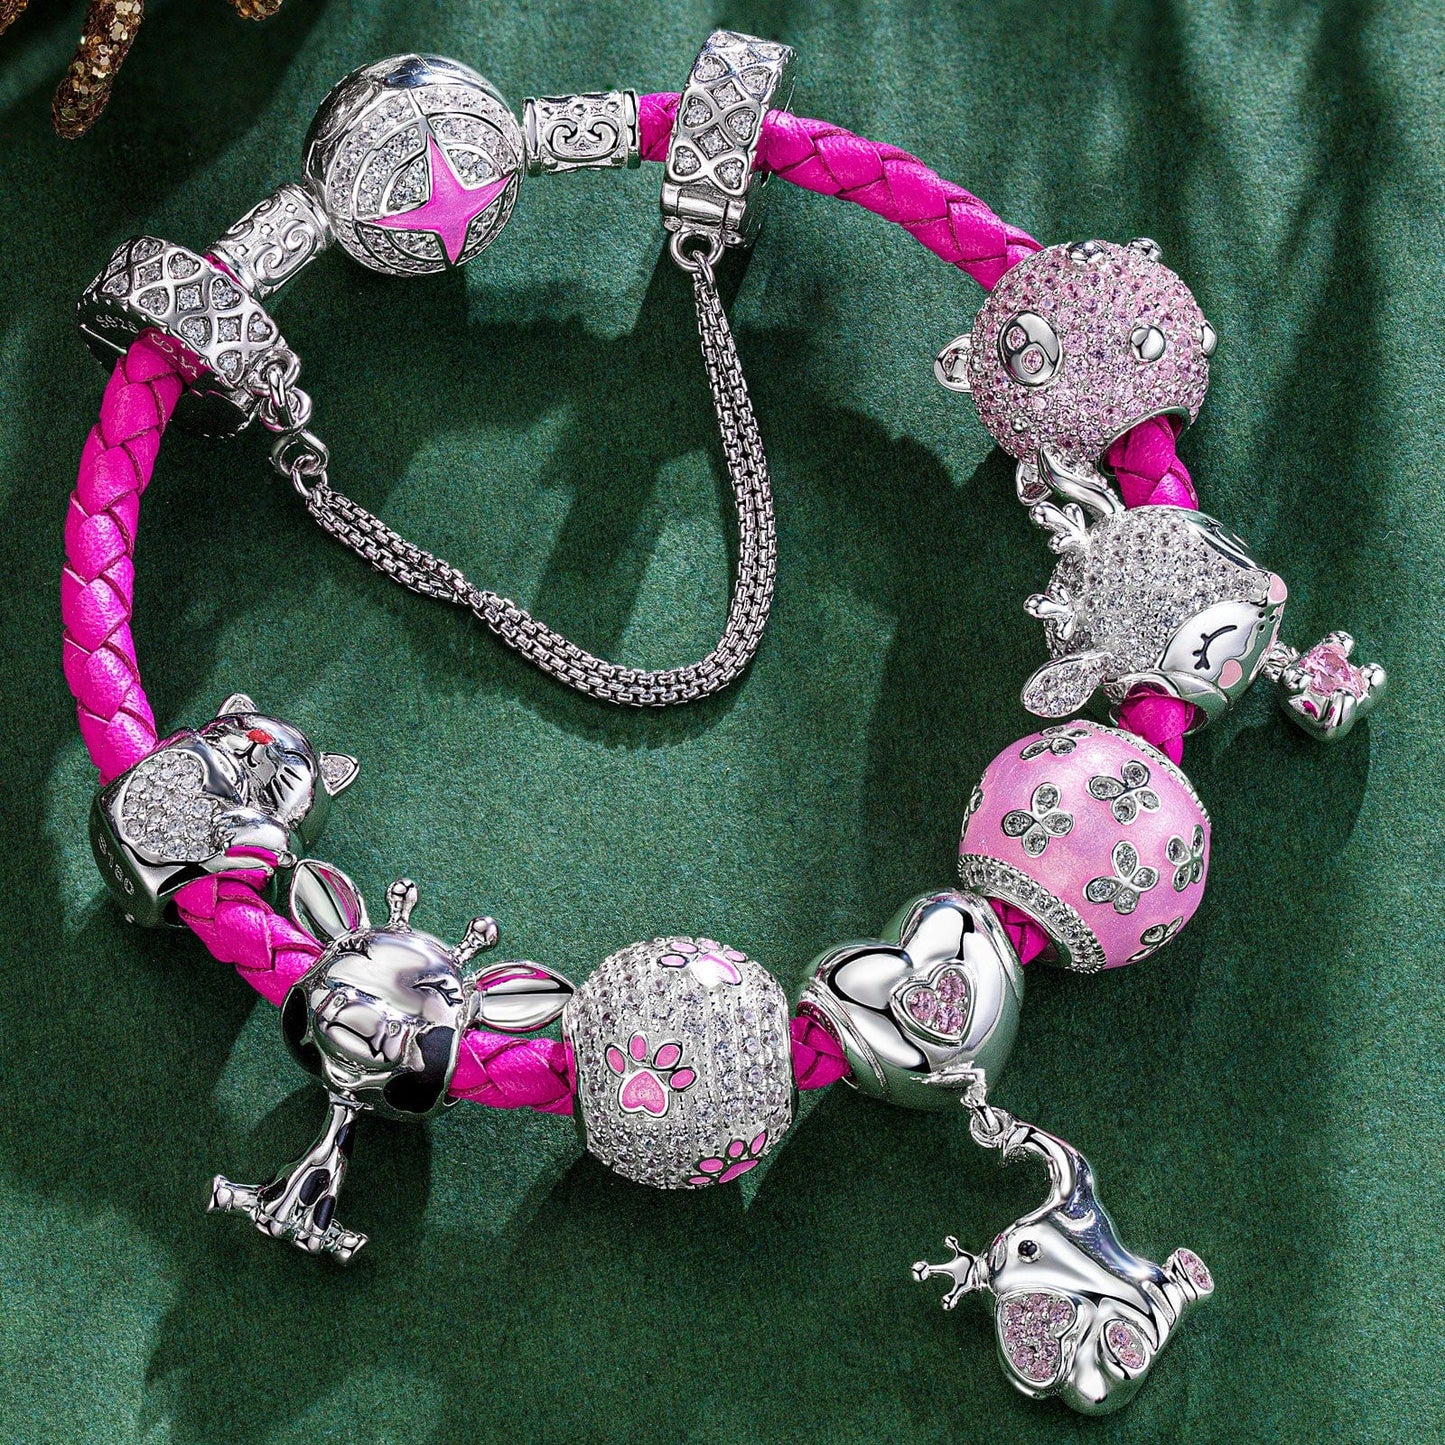 Sterling Silver My Lucky Treasures Animals Charms Bracelet Set With Enamel In Silver Plated